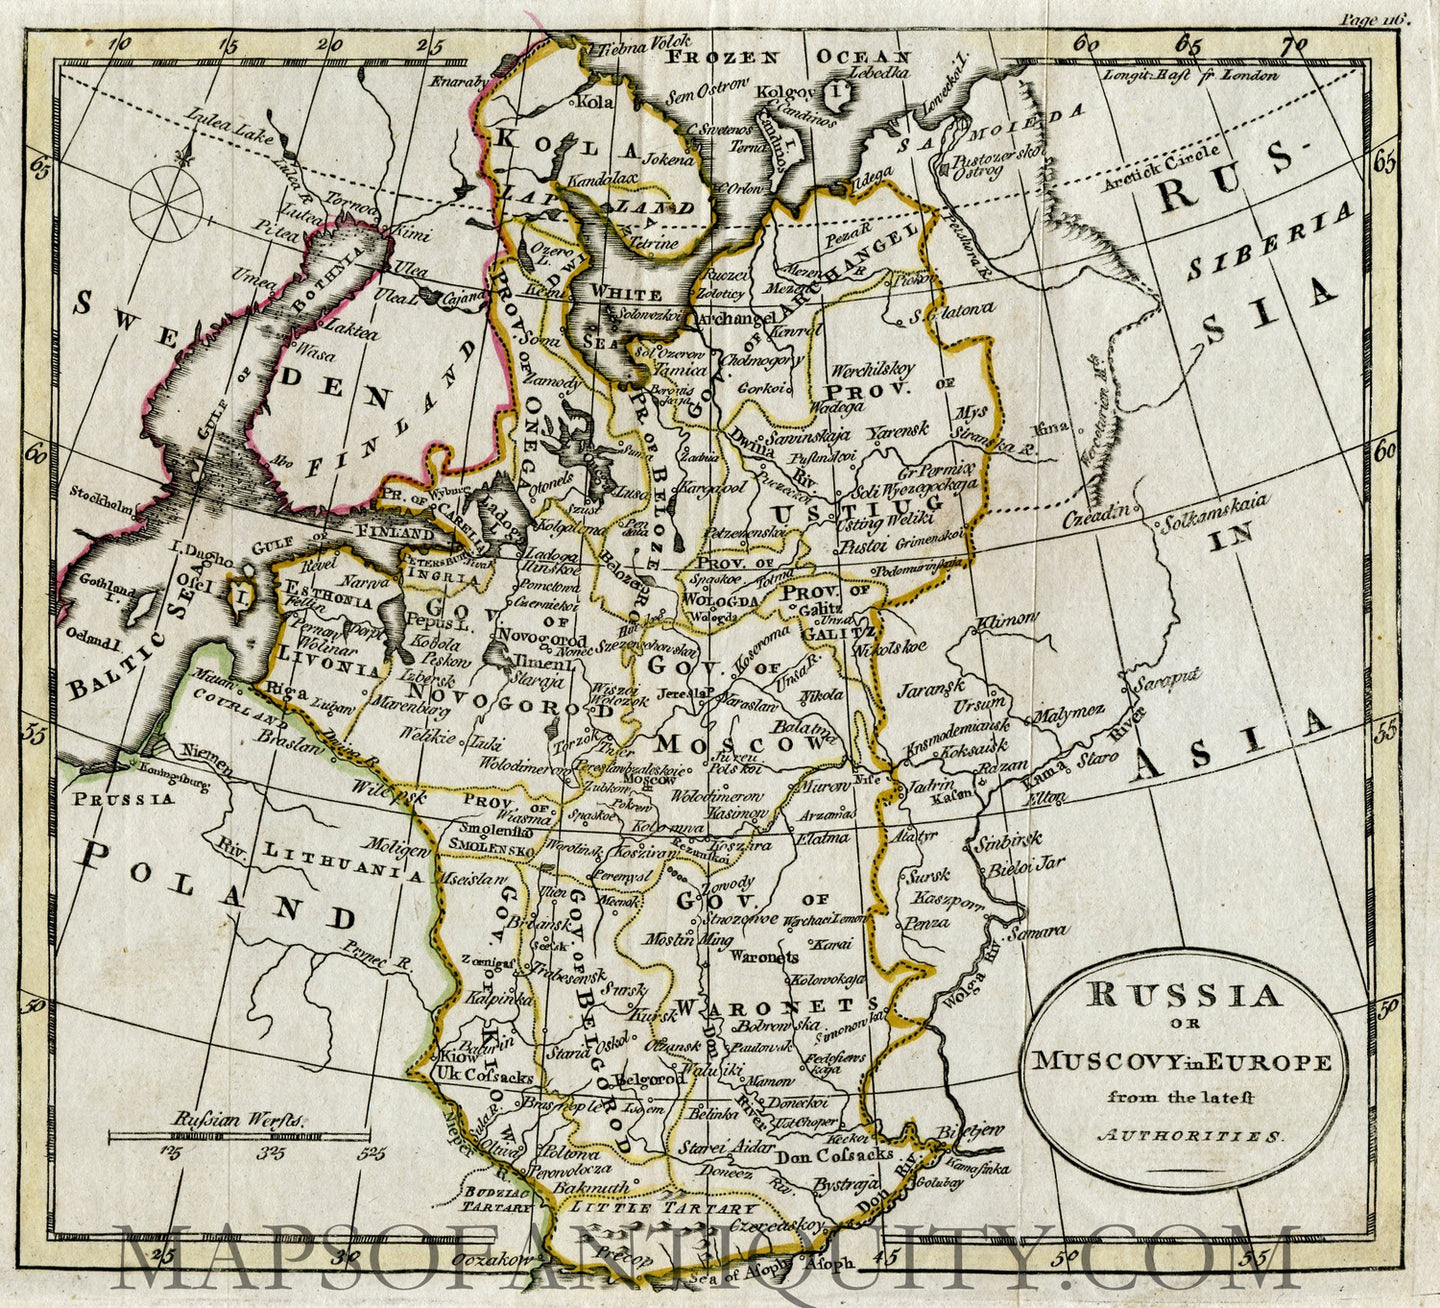 Hand-colored-antique-map-Russia-or-Muscovy-in-Europe-from-the-latest-Authorities-Europe-Russia-1792-Kitchin/Guthrie-Maps-Of-Antiquity